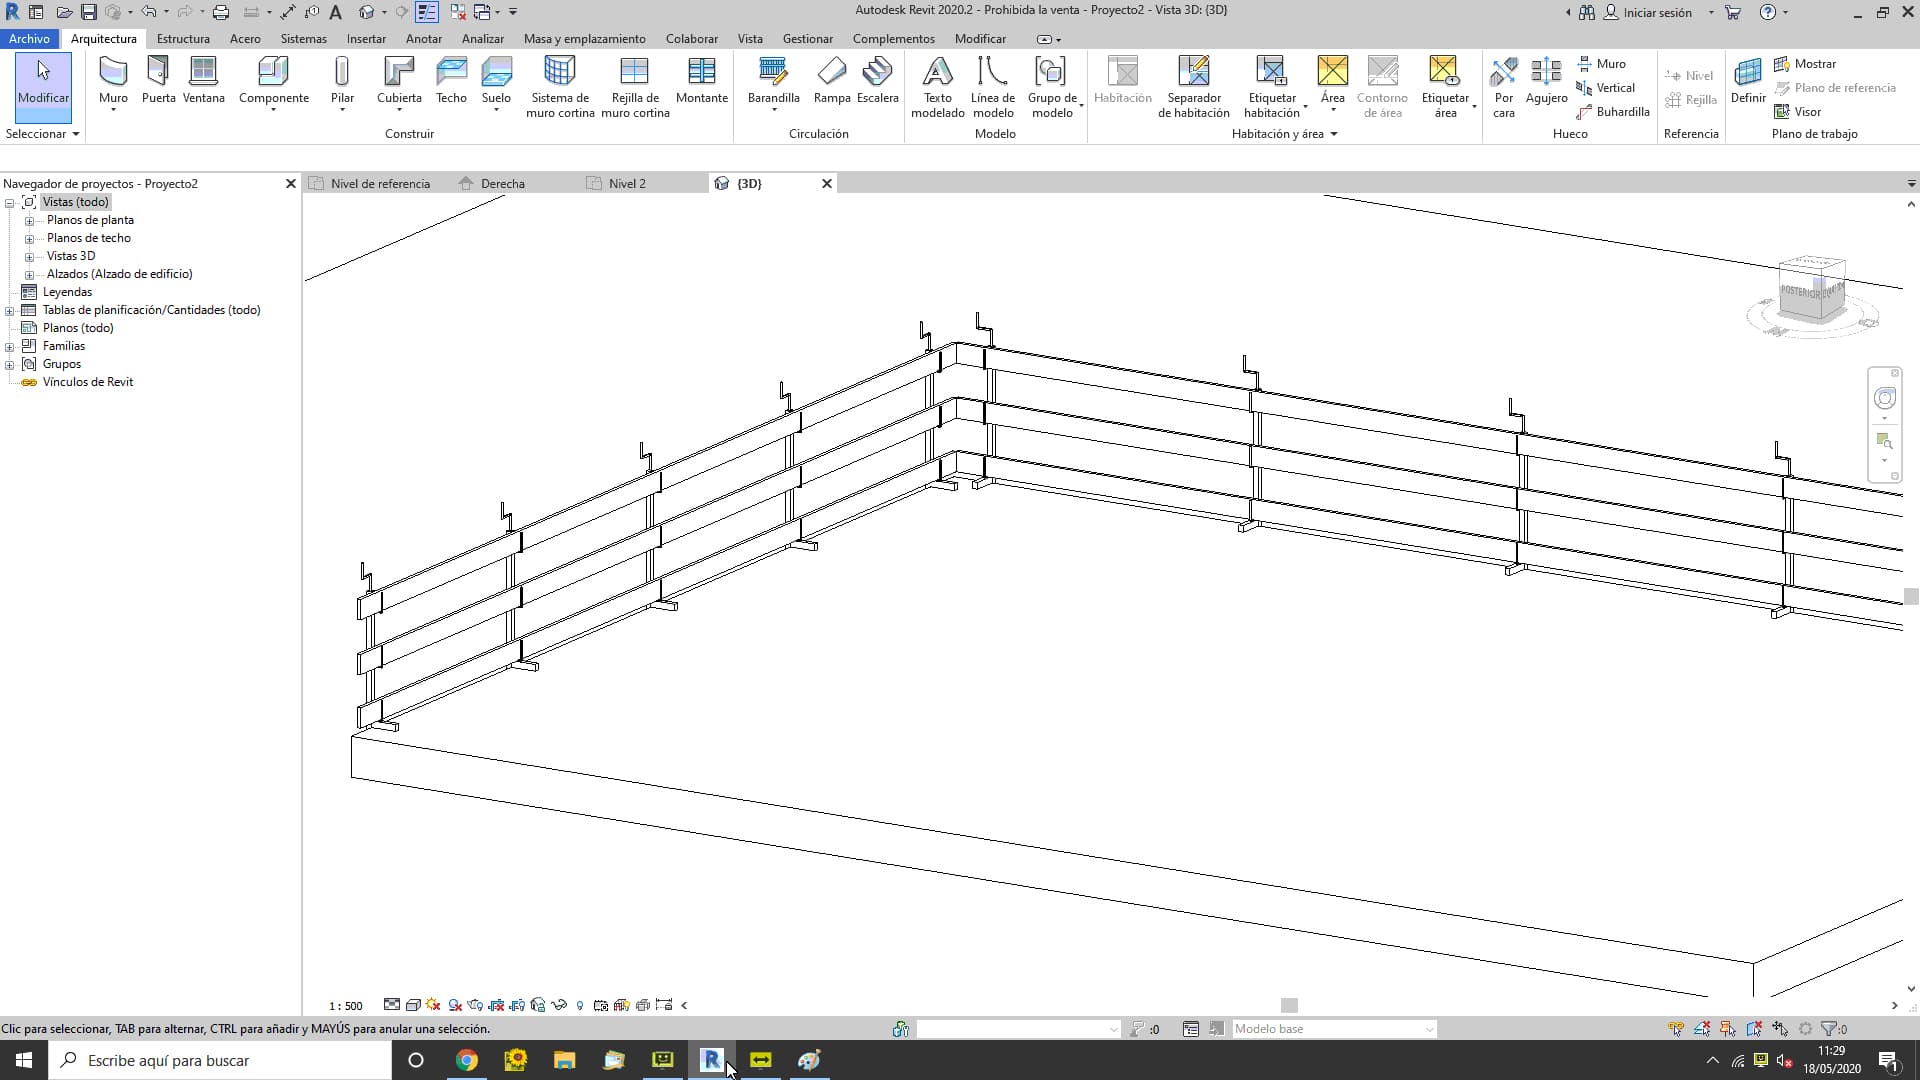 Add-in para Revit Health and Safety